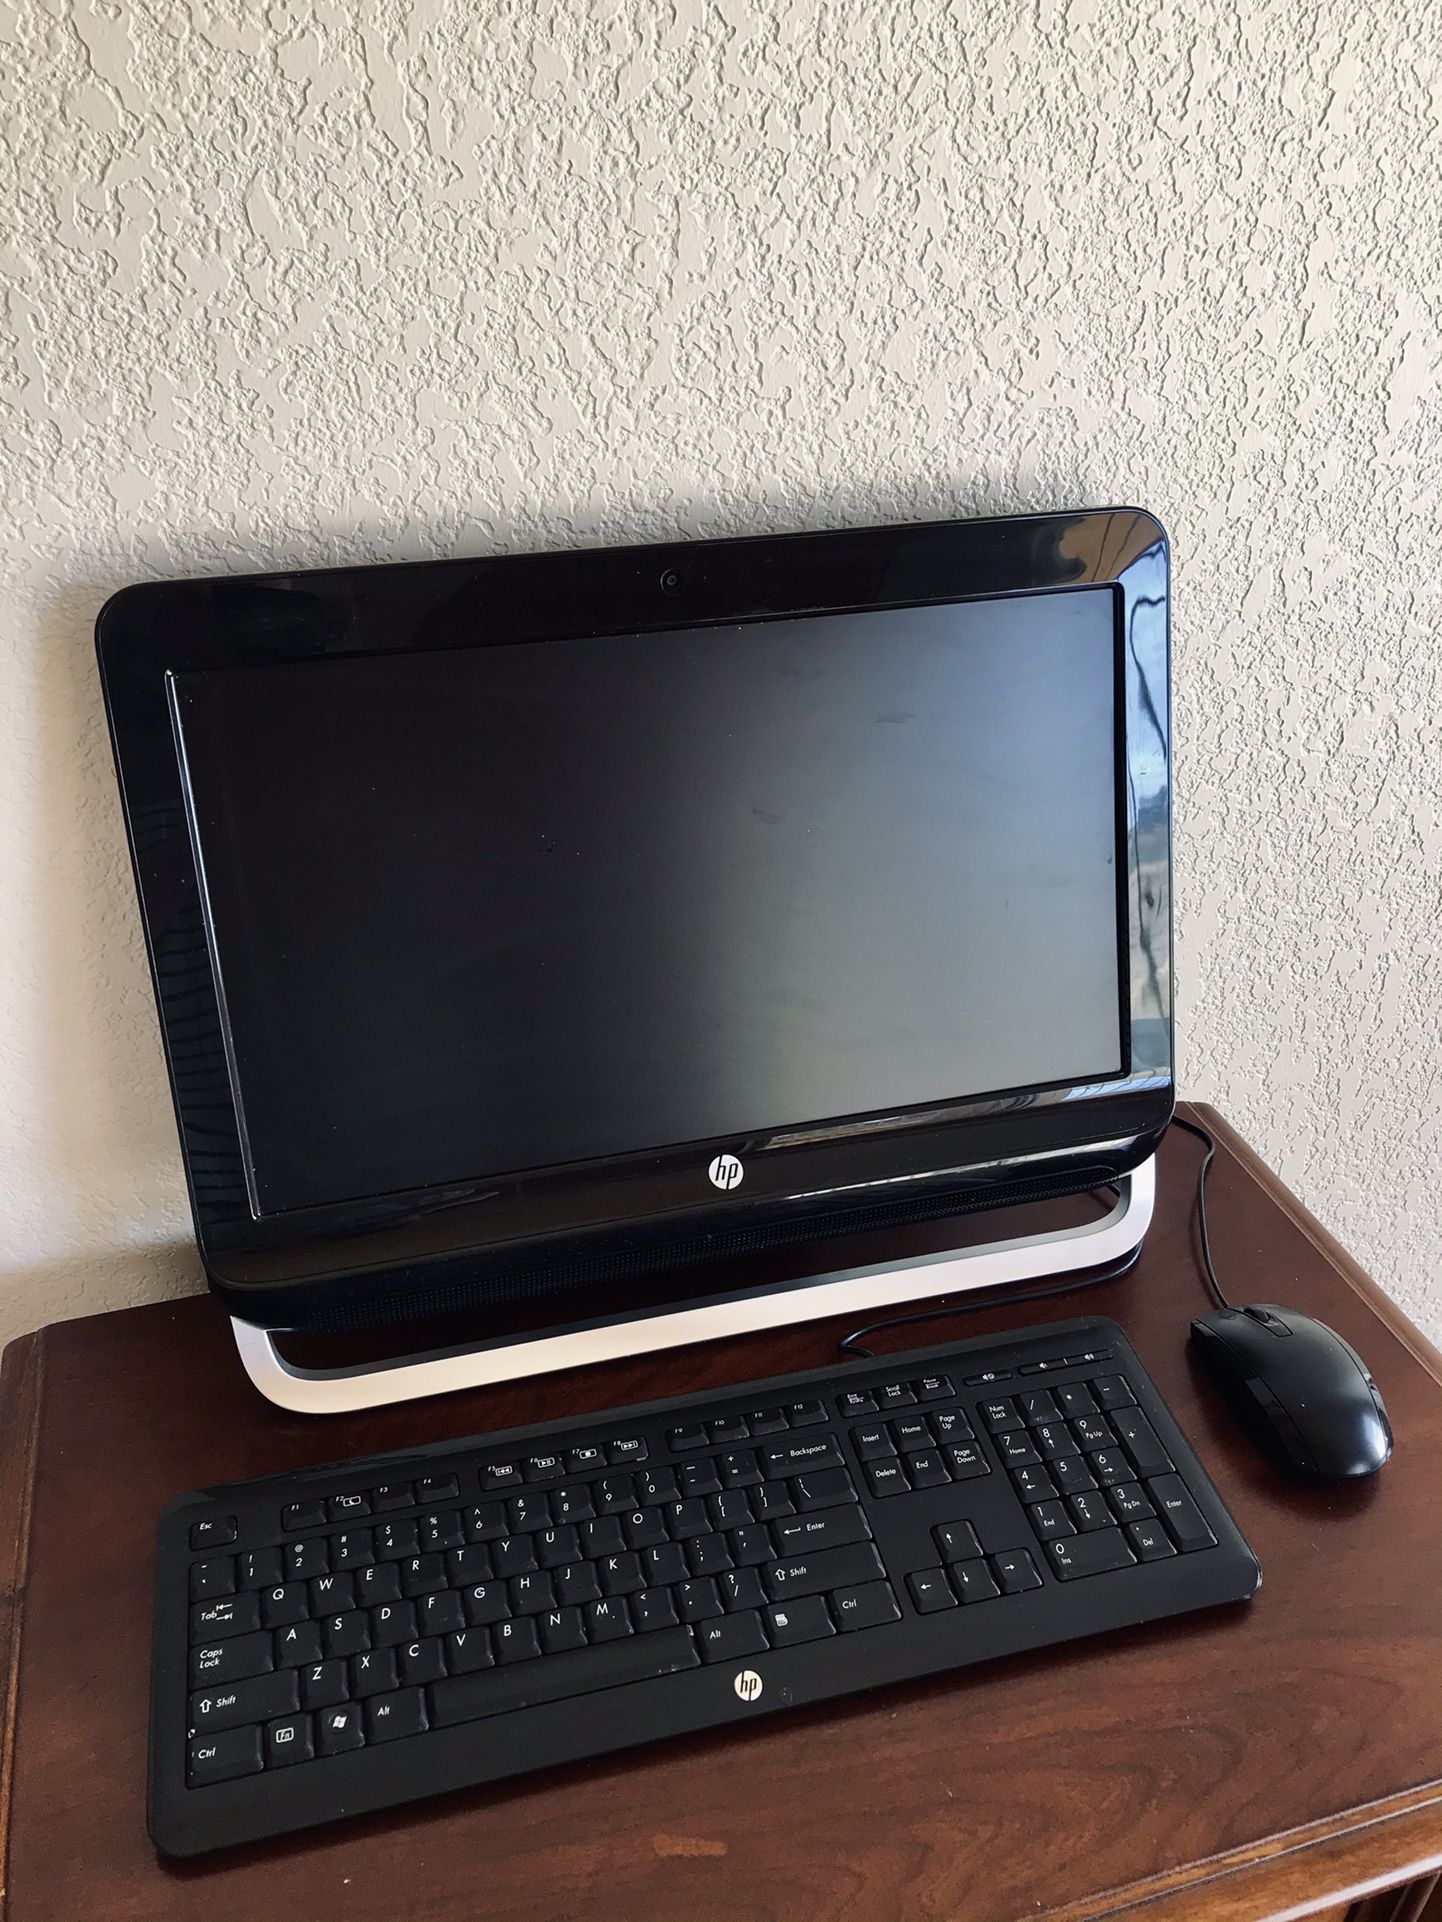 HP Microsoft Computer, Comes With Mouse and Keyboard!